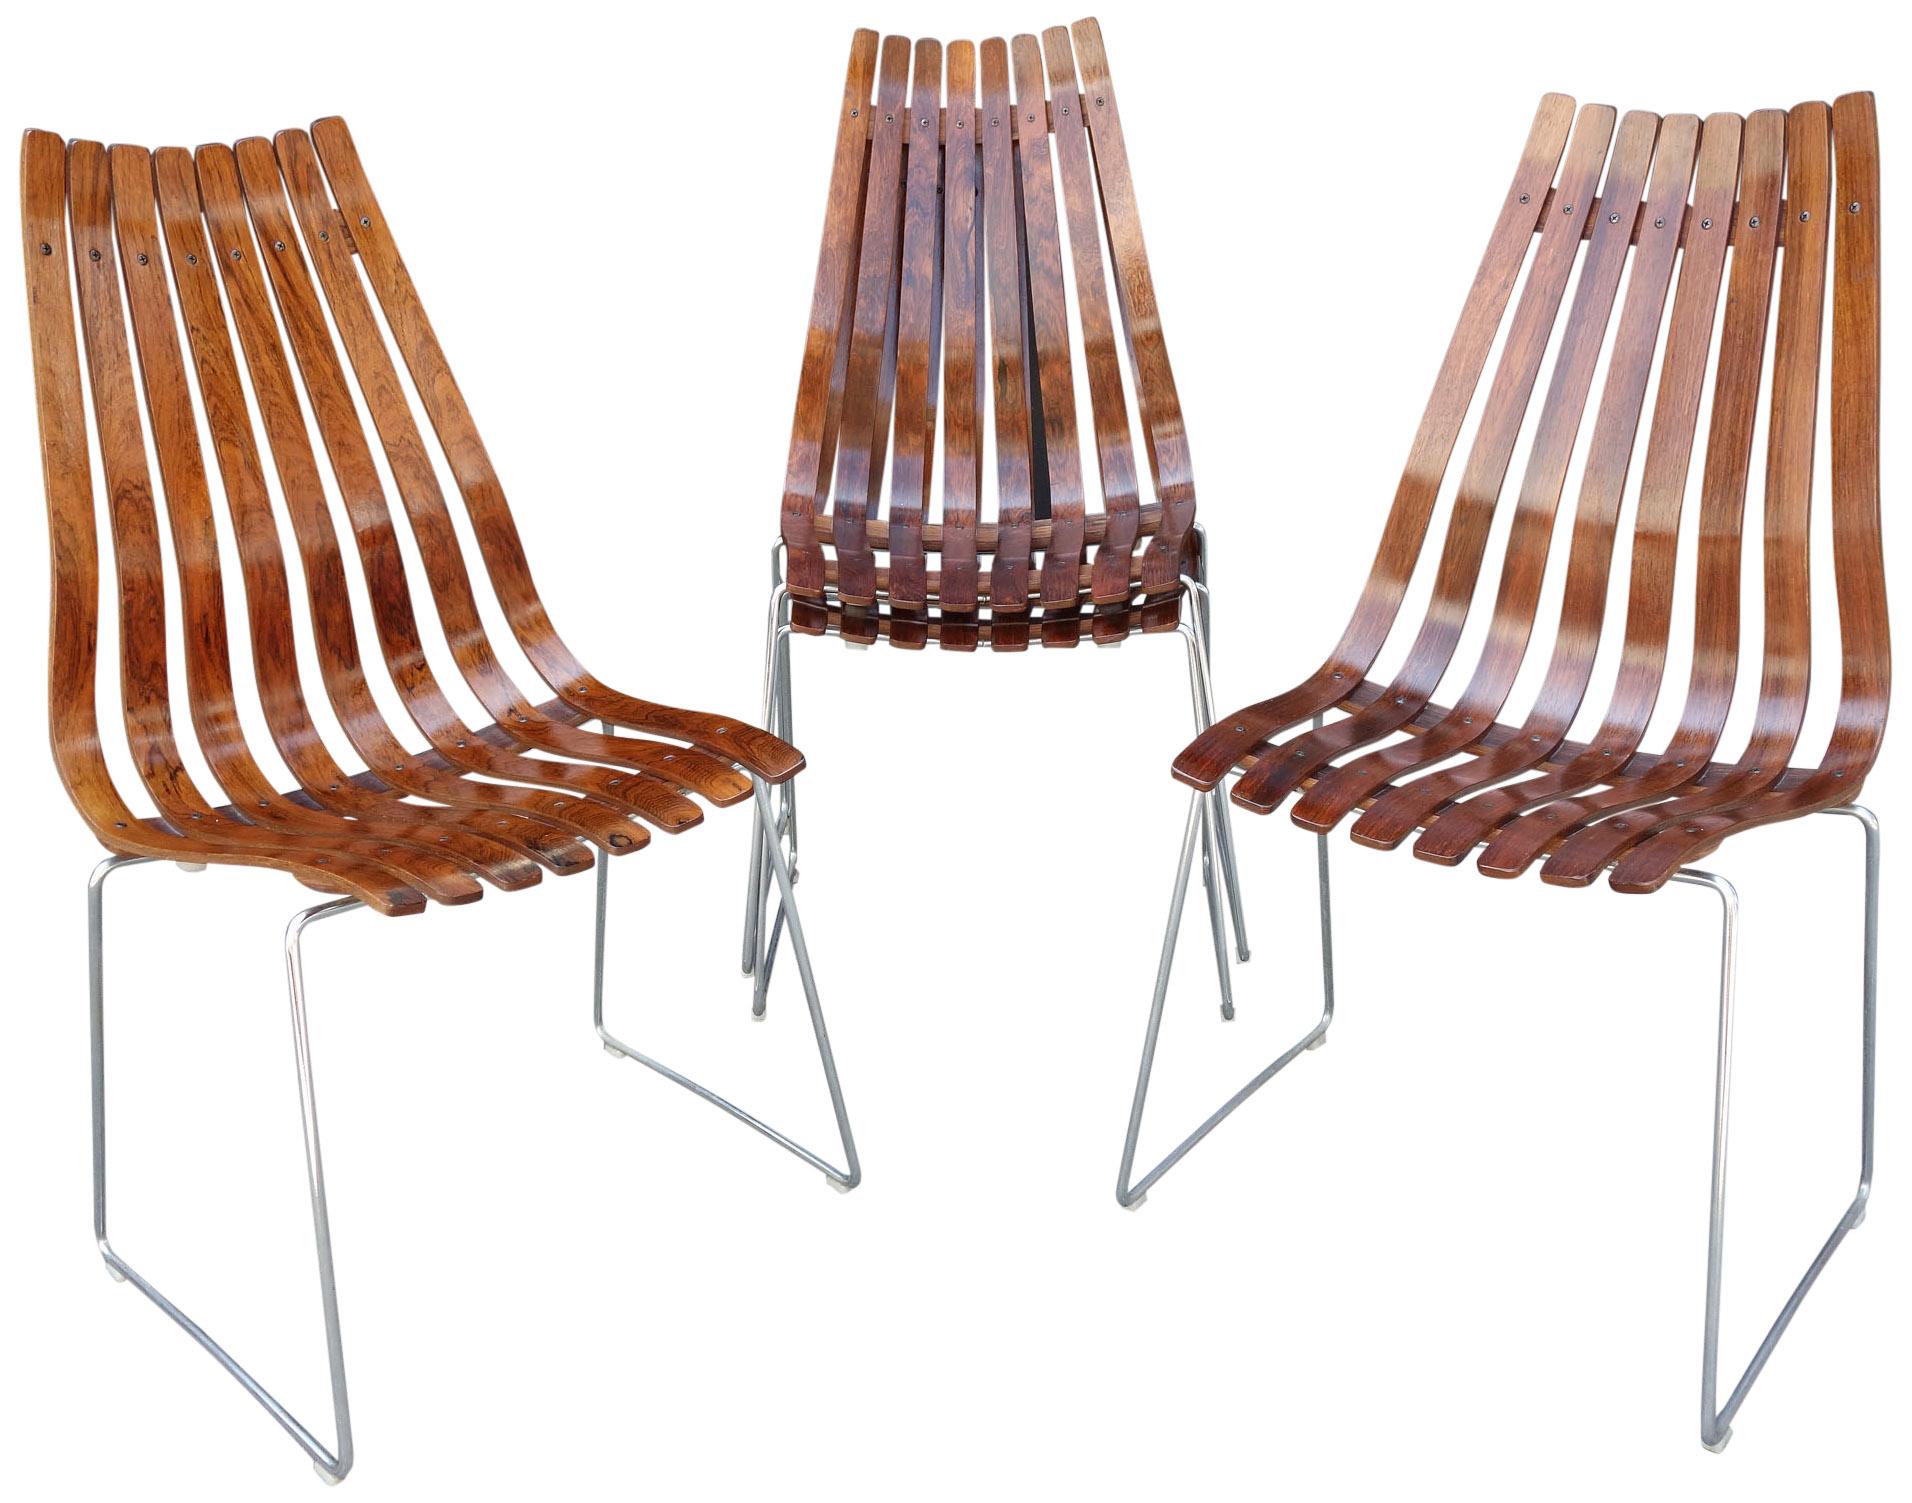 Midcentury Scandia Chairs by Hans Brattrud for Hove Mobler 1